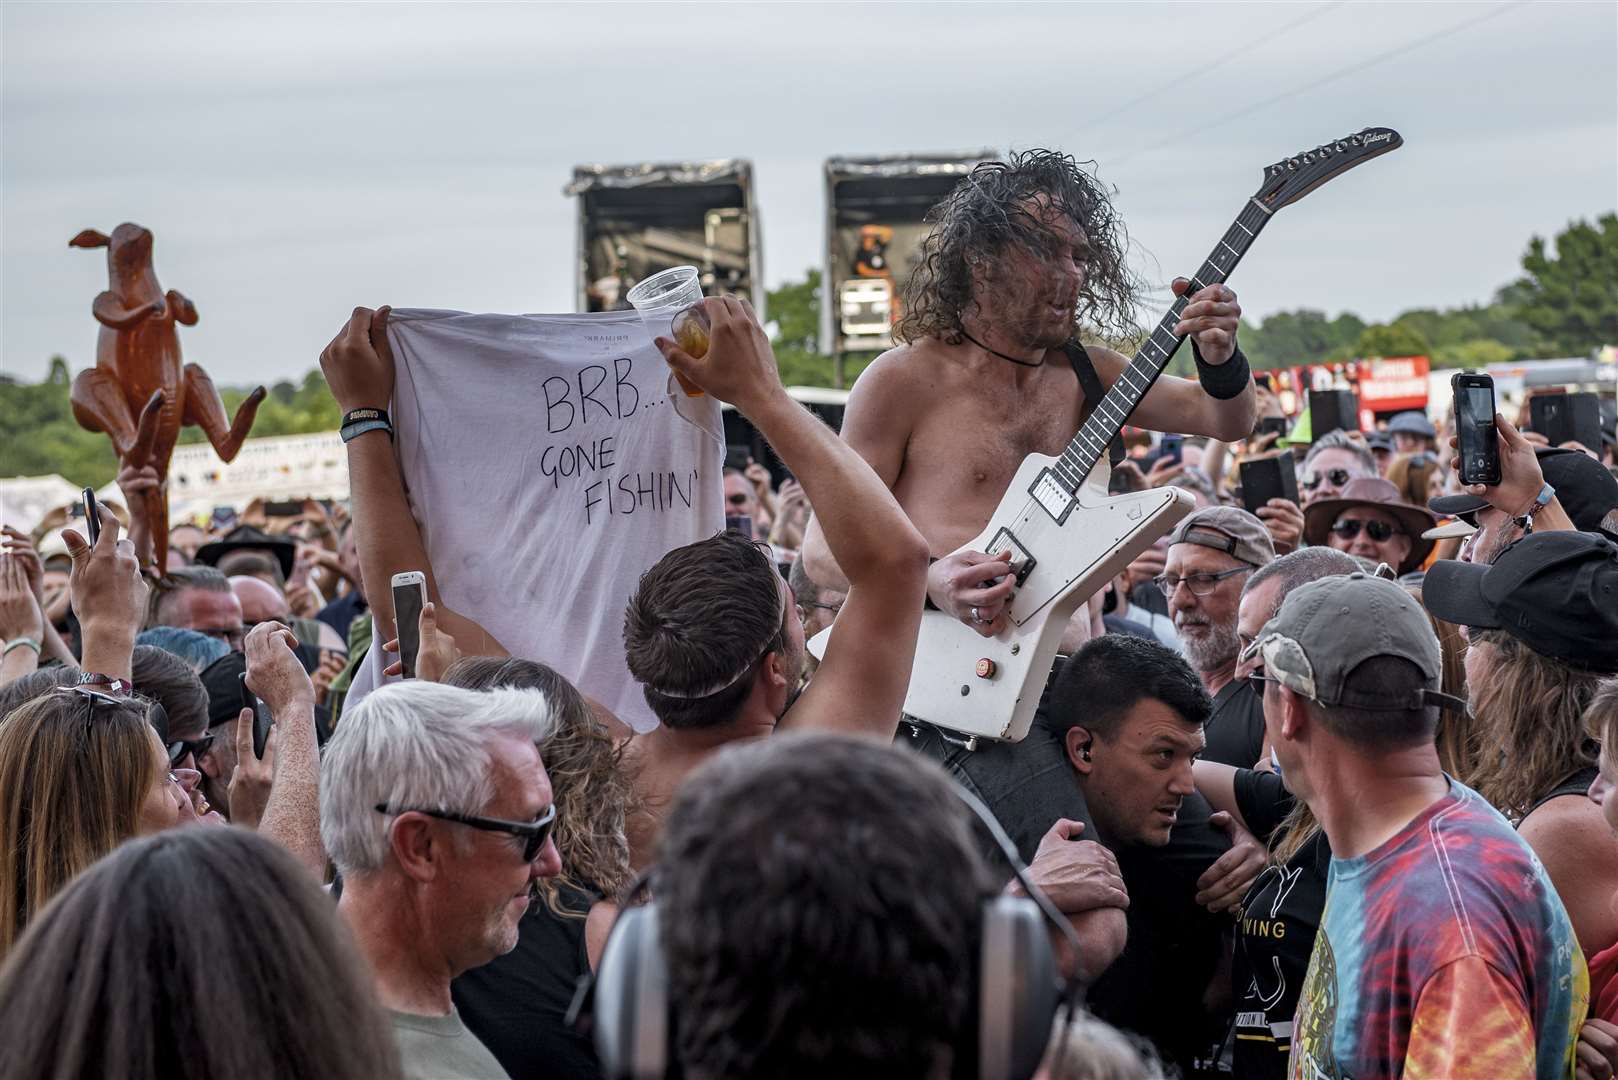 Airbourne previously performed at Maidstone's Ramblin' Man Festival. Picture: Chris White